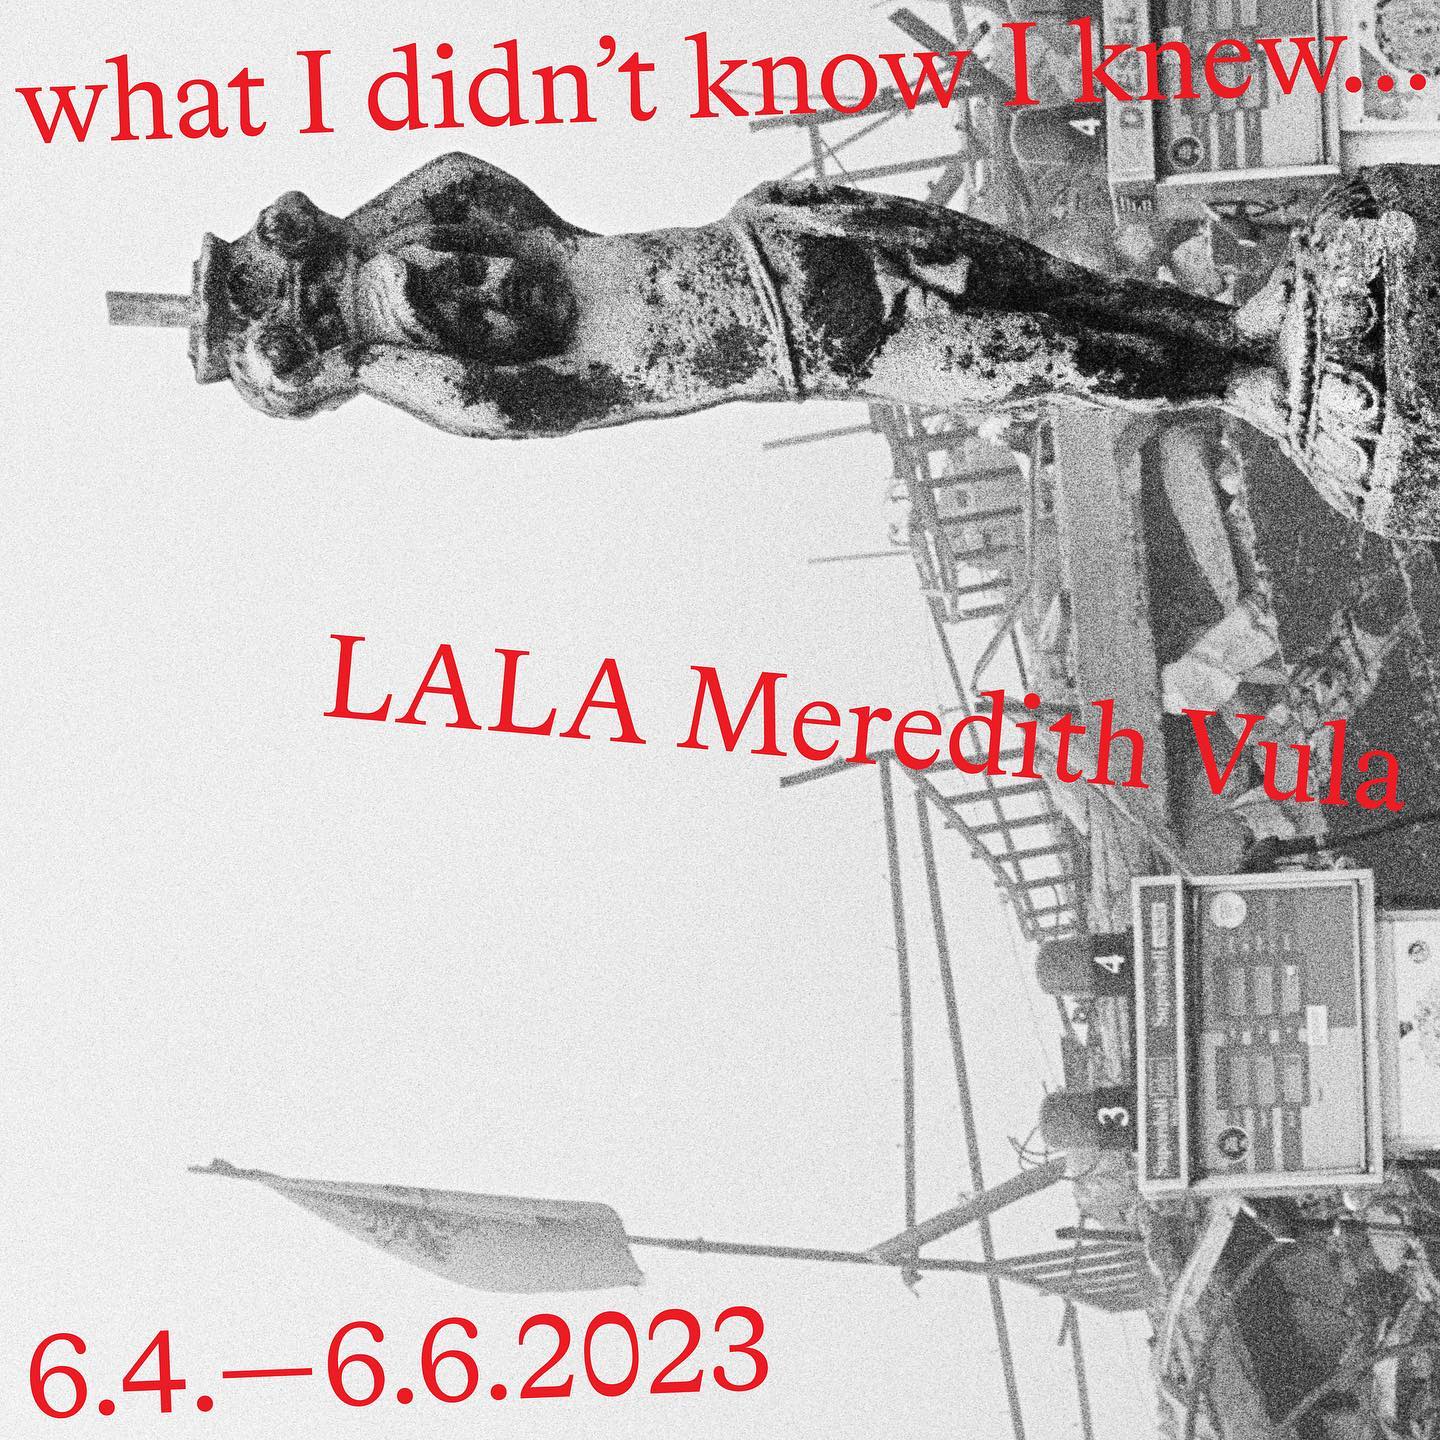 "What I didn't know I knew" by Lala Meredith-Vula On View until June 6th in Prishtina